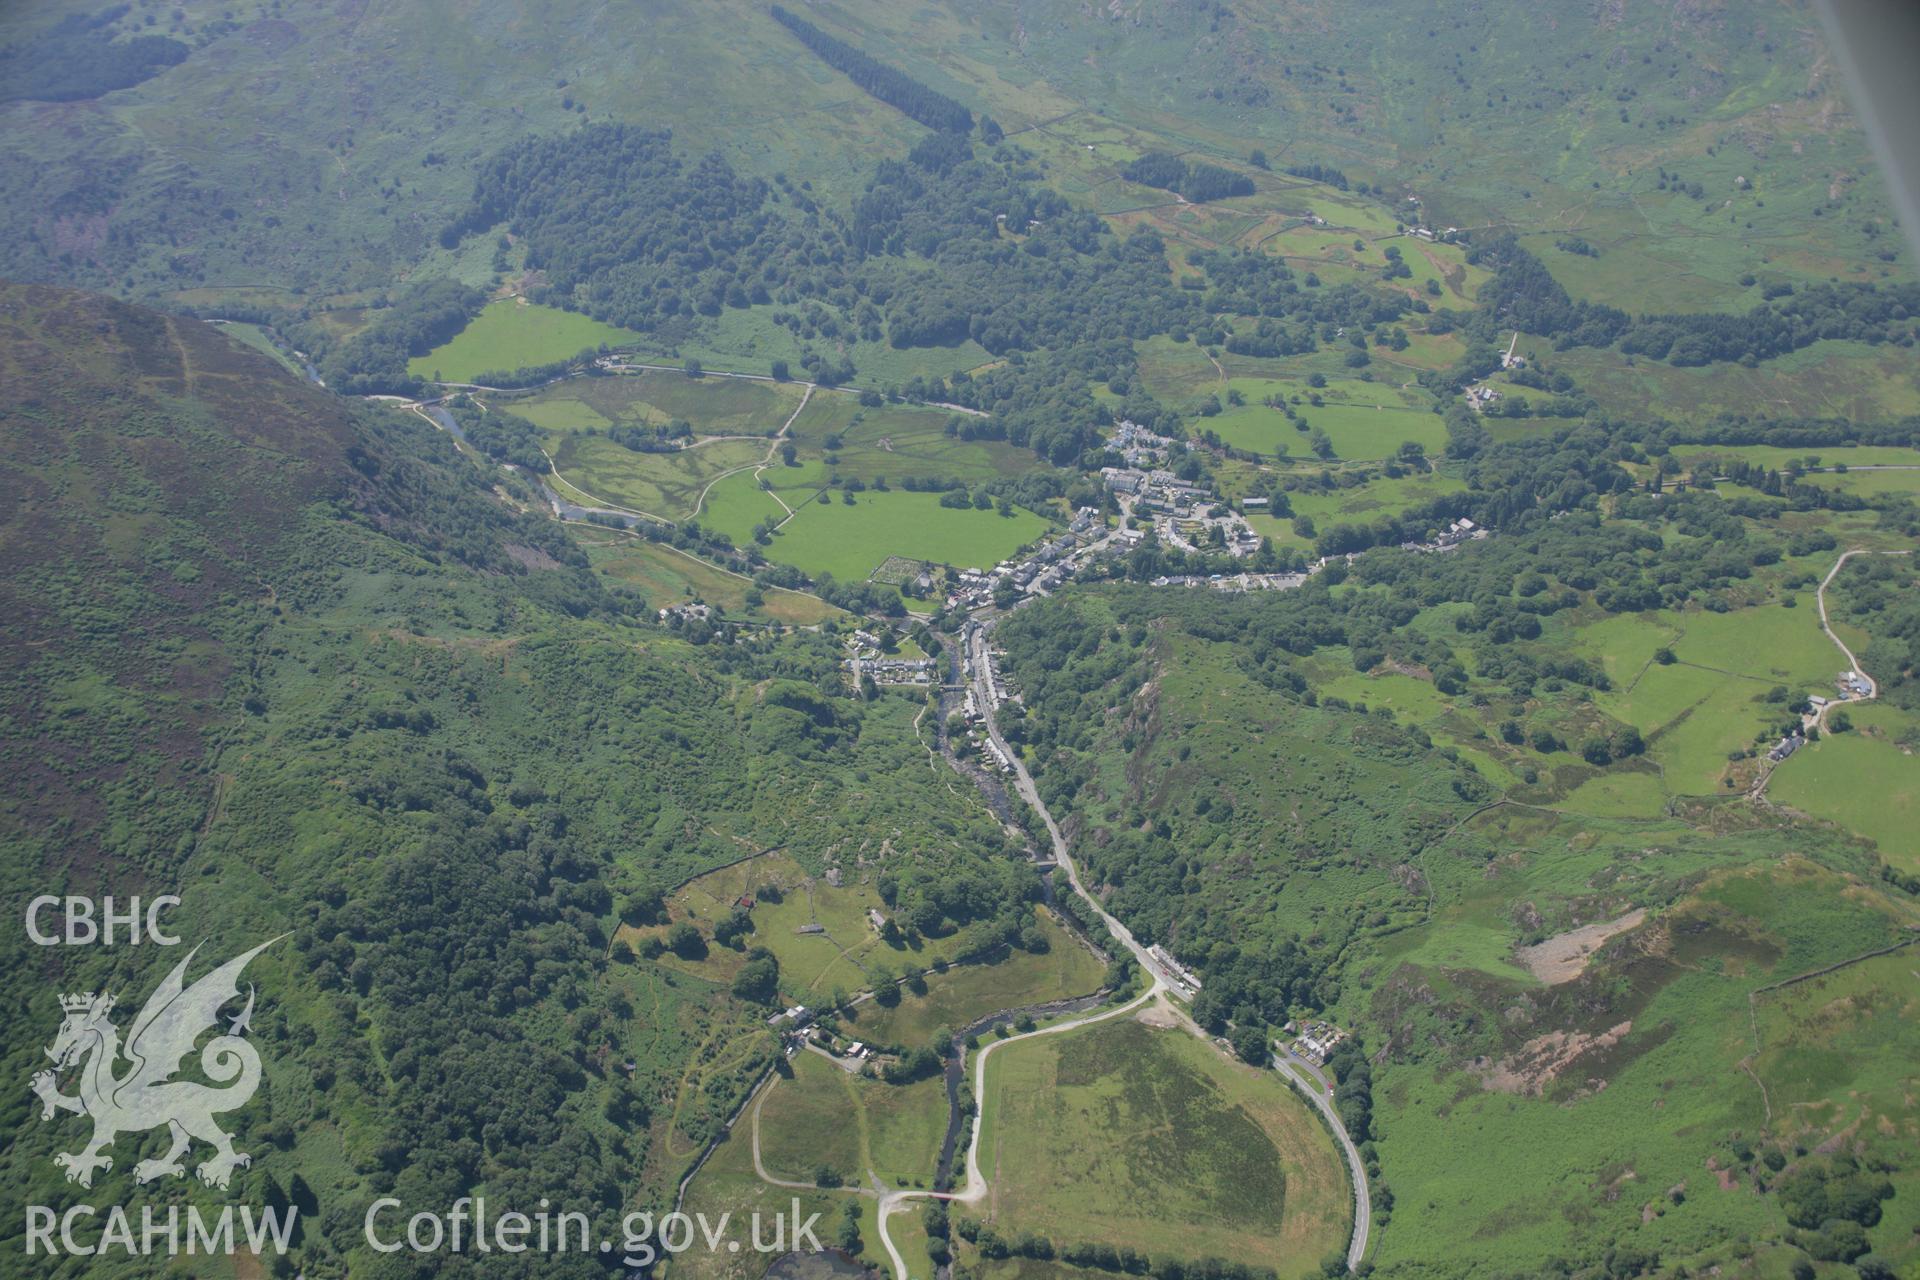 RCAHMW colour oblique aerial photograph of Beddgelert. Taken on 18 July 2006 by Toby Driver.